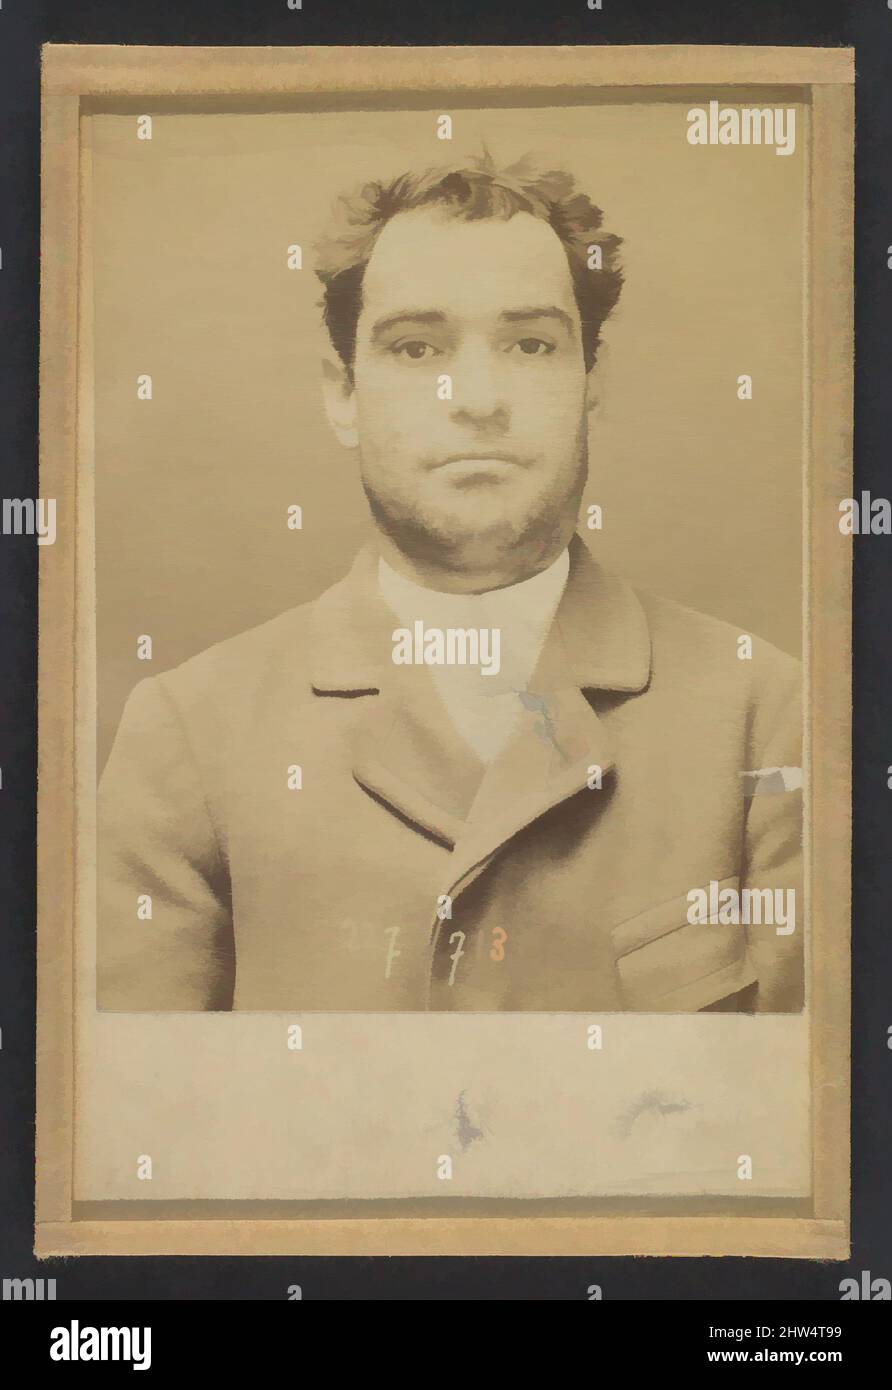 Art inspired by Dauriac. Henri, Georges. 36 ans, né à Memphis (USA). Agent d'affaires. Extortion de fonds. 22/12/94., 1894, Albumen silver print from glass negative, 10.5 x 7 x 0.5 cm (4 1/8 x 2 3/4 x 3/16 in.) each, Photographs, Alphonse Bertillon (French, 1853–1914), Born into a, Classic works modernized by Artotop with a splash of modernity. Shapes, color and value, eye-catching visual impact on art. Emotions through freedom of artworks in a contemporary way. A timeless message pursuing a wildly creative new direction. Artists turning to the digital medium and creating the Artotop NFT Stock Photo